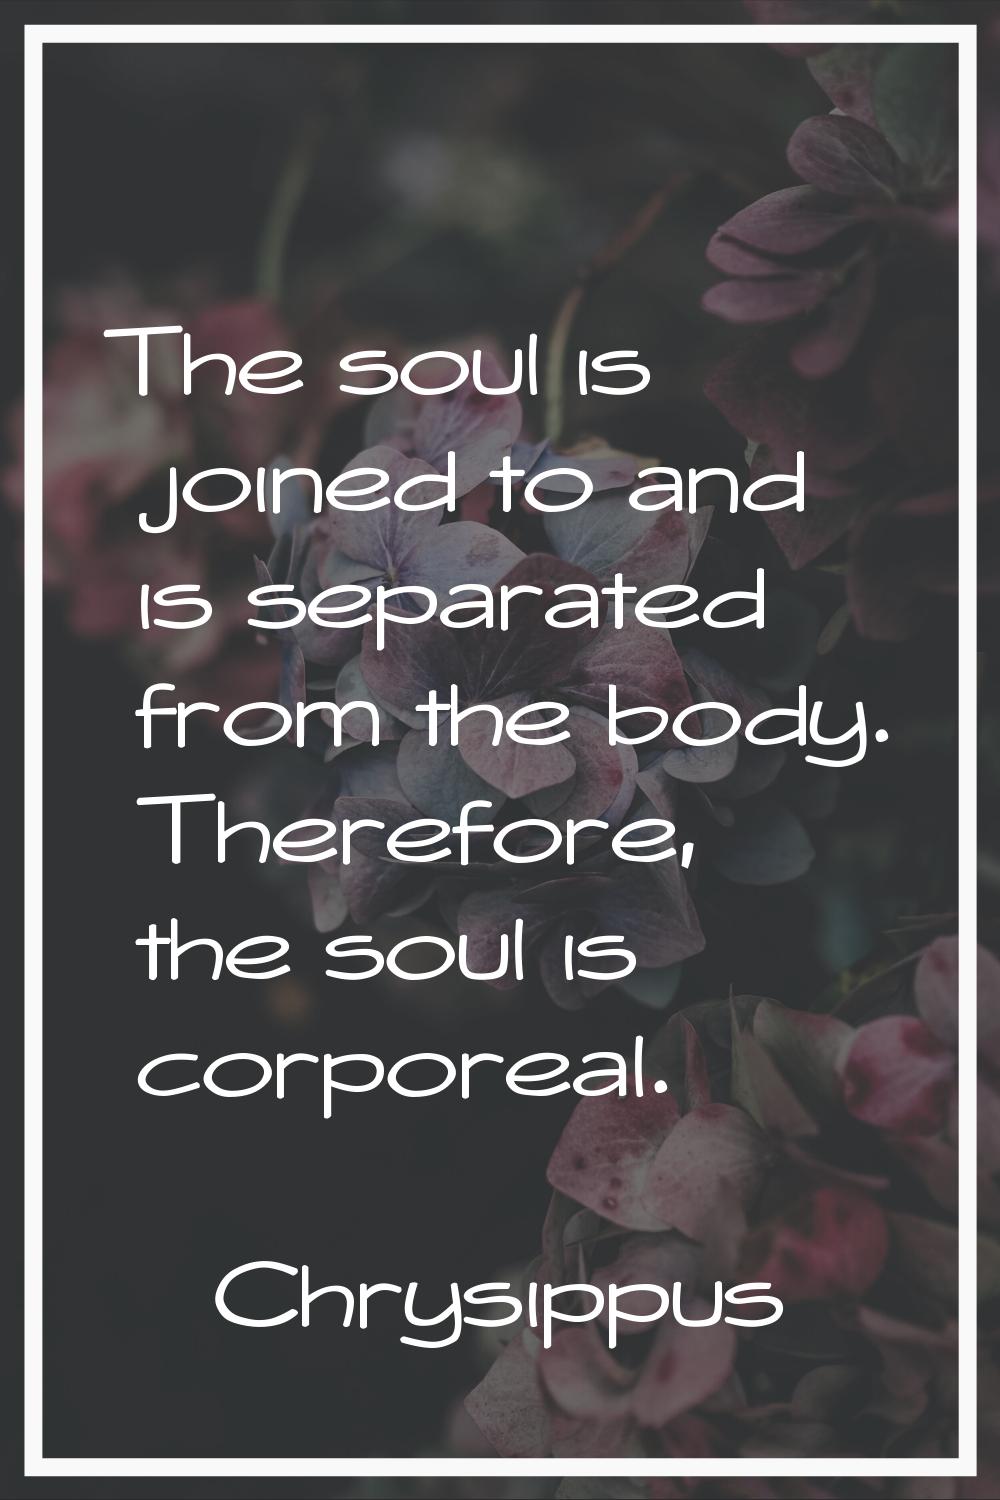 The soul is joined to and is separated from the body. Therefore, the soul is corporeal.